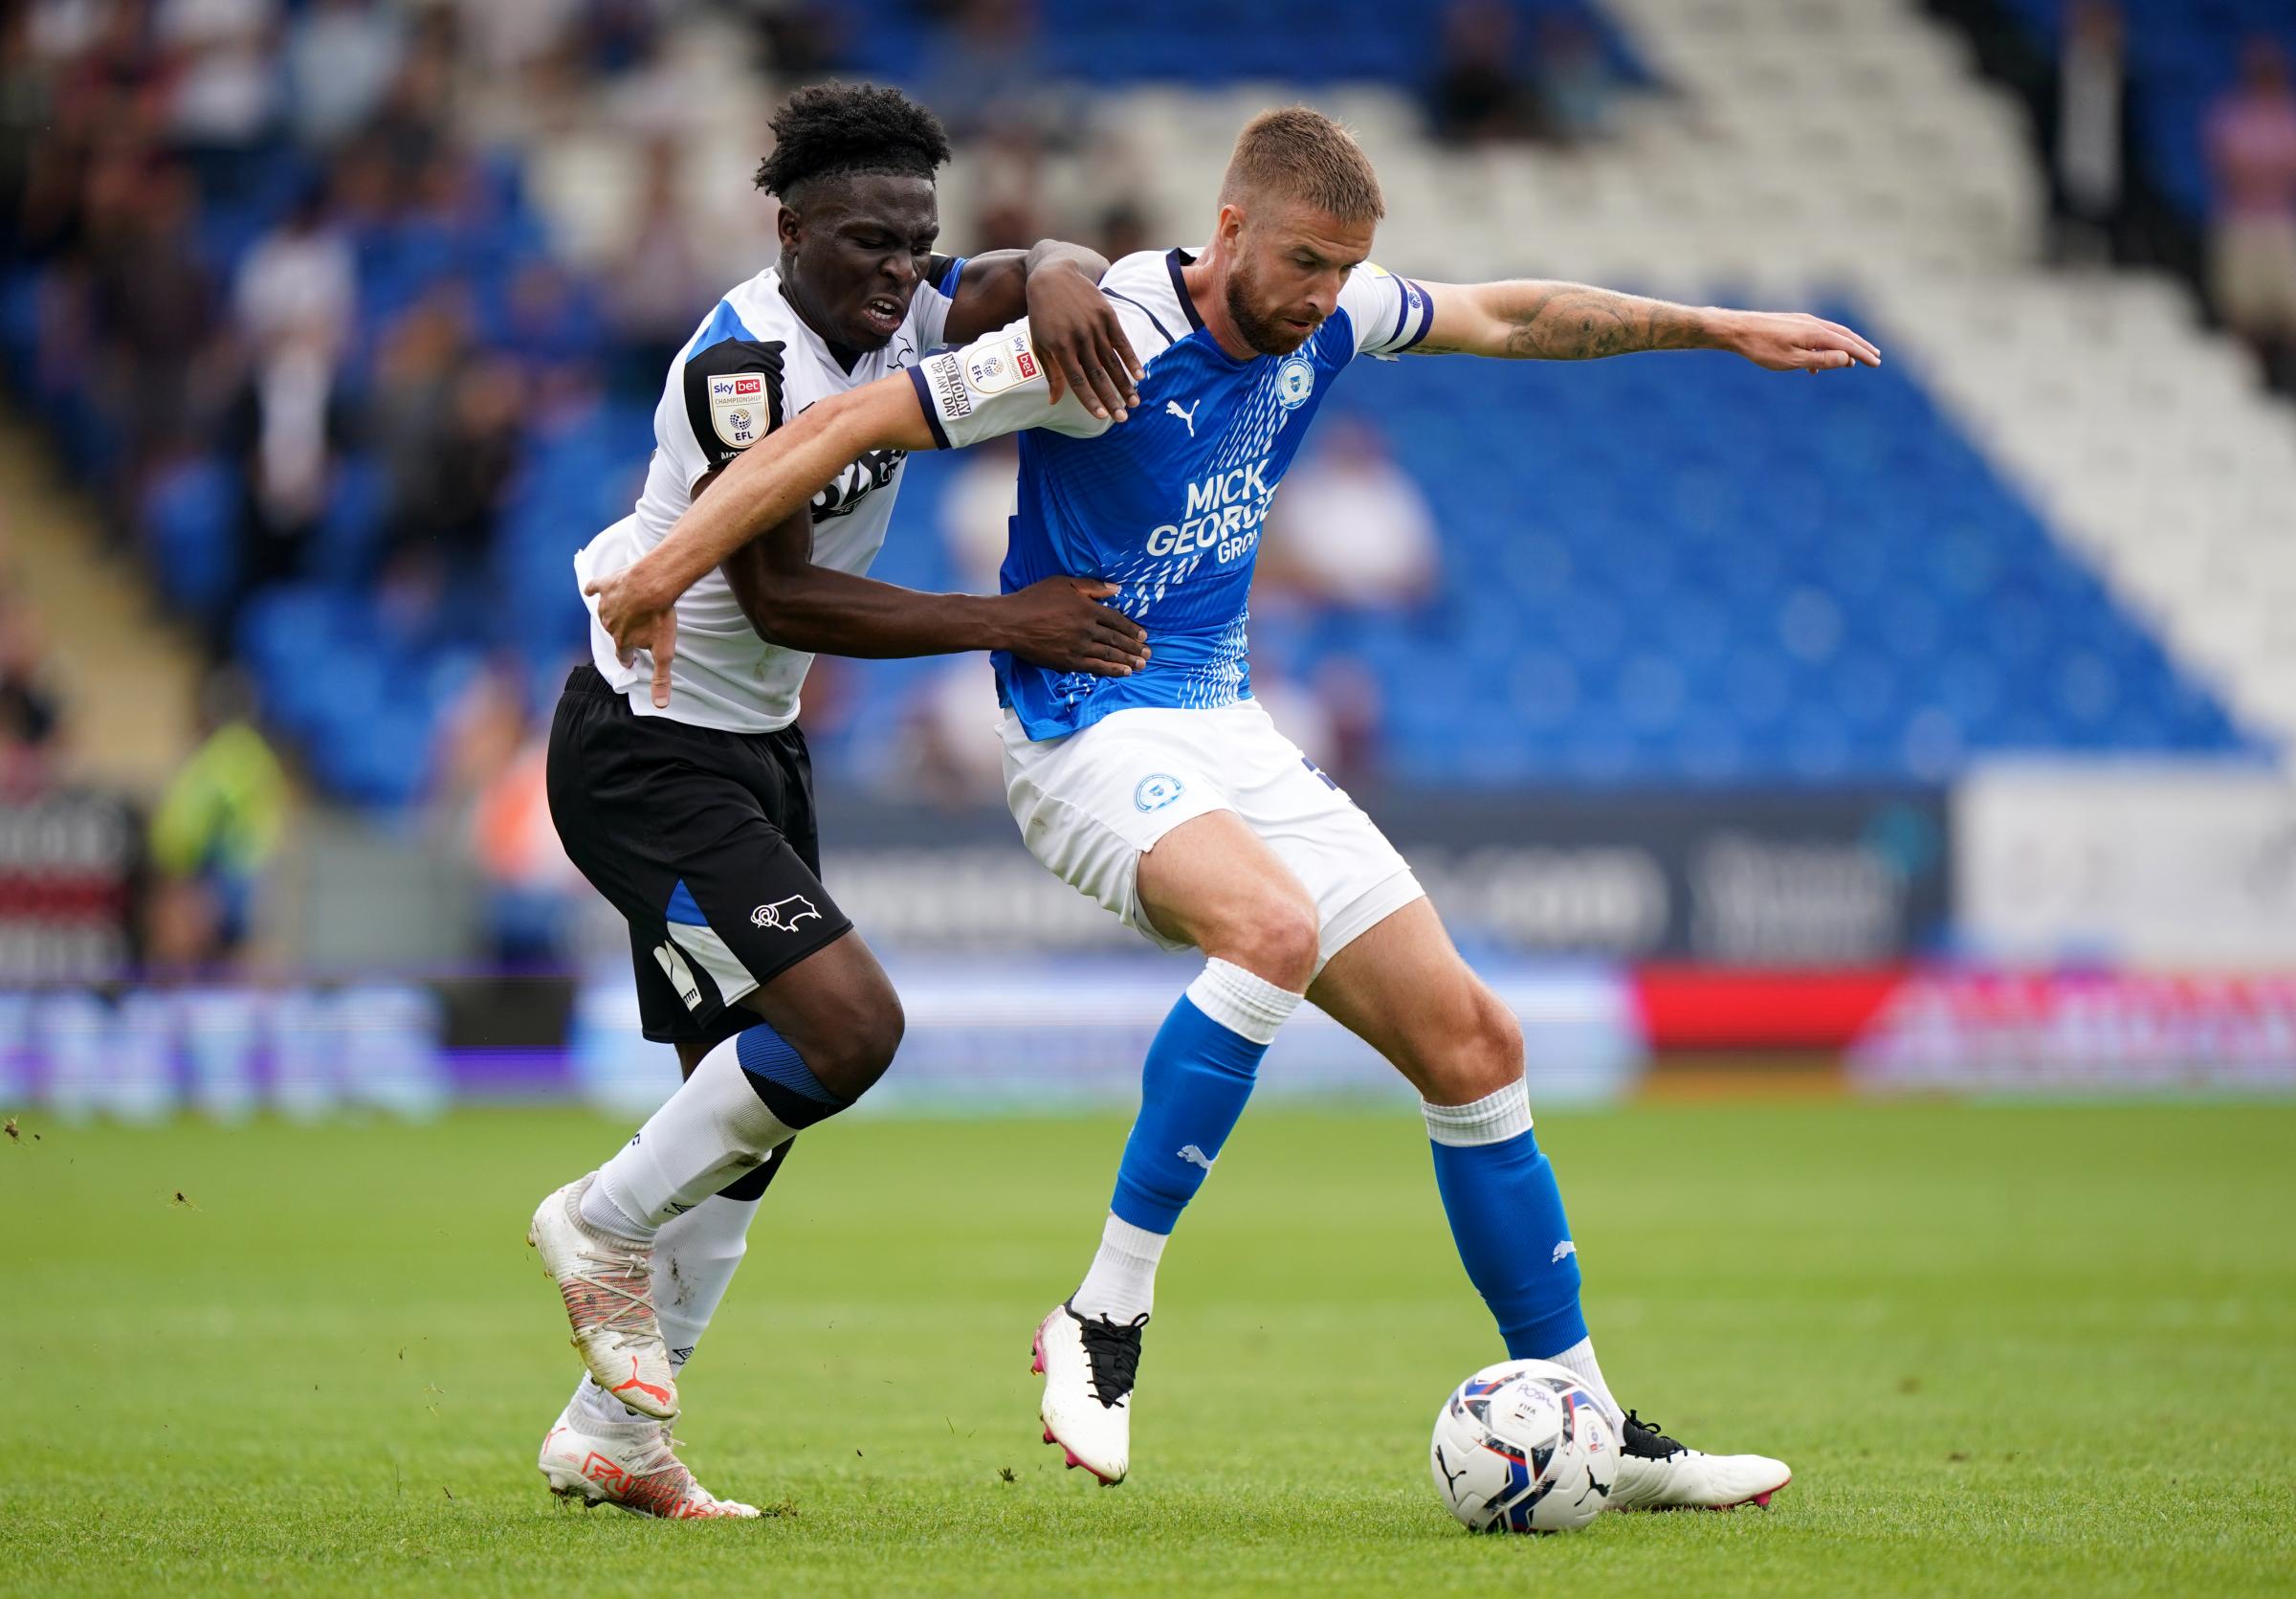 Ex-Bolton Wanderers and Peterborough United defender Mark Beevers 'agrees deal' with Perth Glory